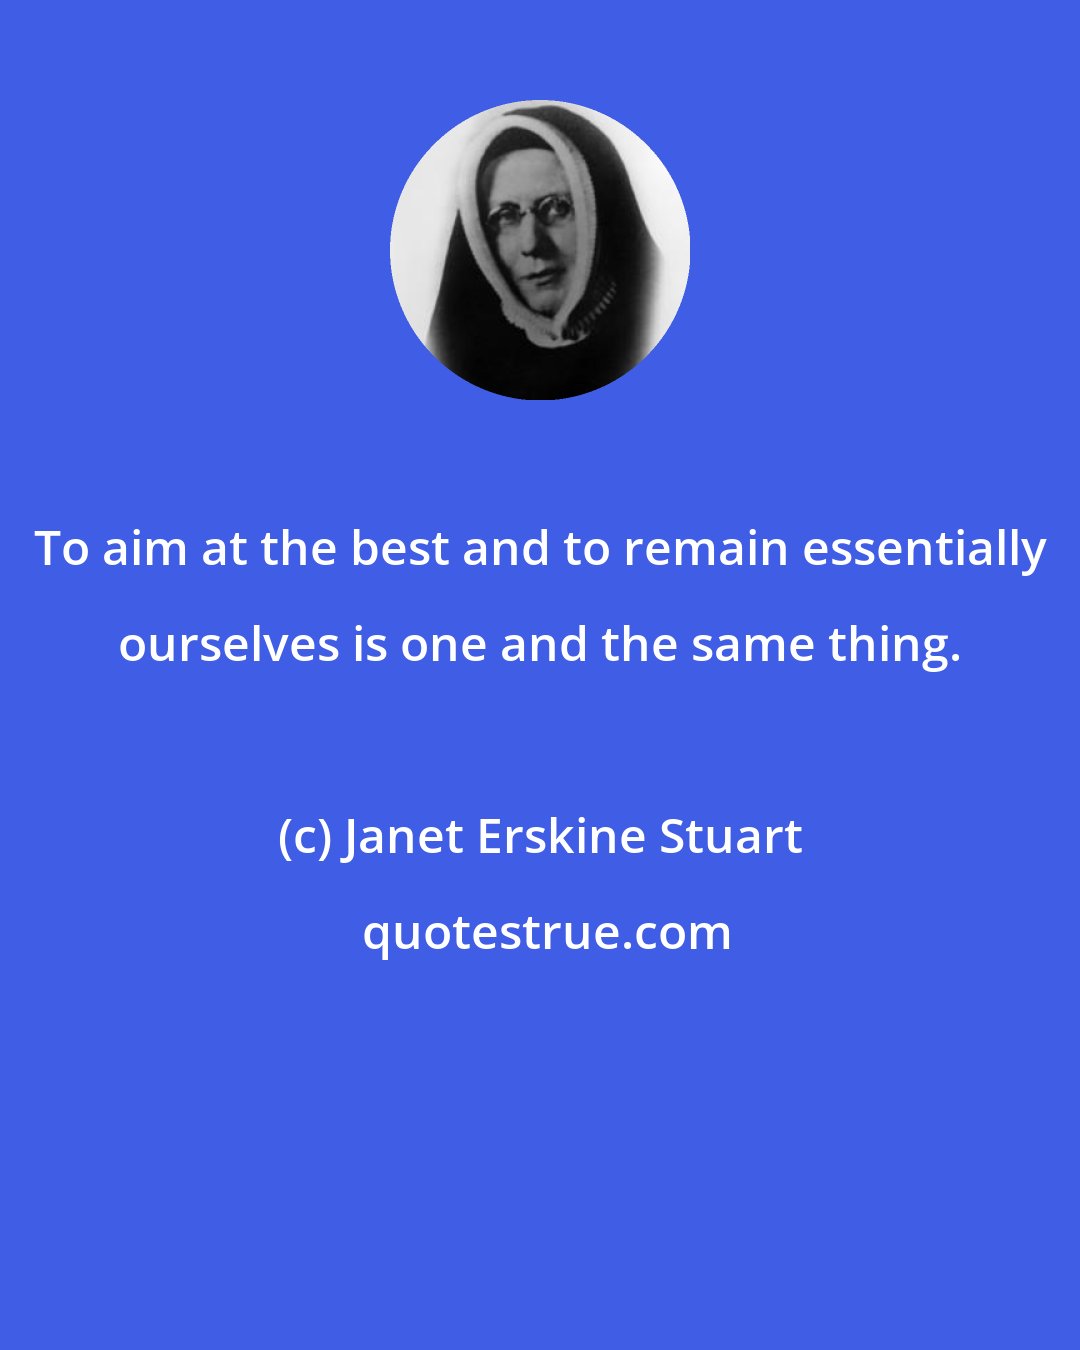 Janet Erskine Stuart: To aim at the best and to remain essentially ourselves is one and the same thing.